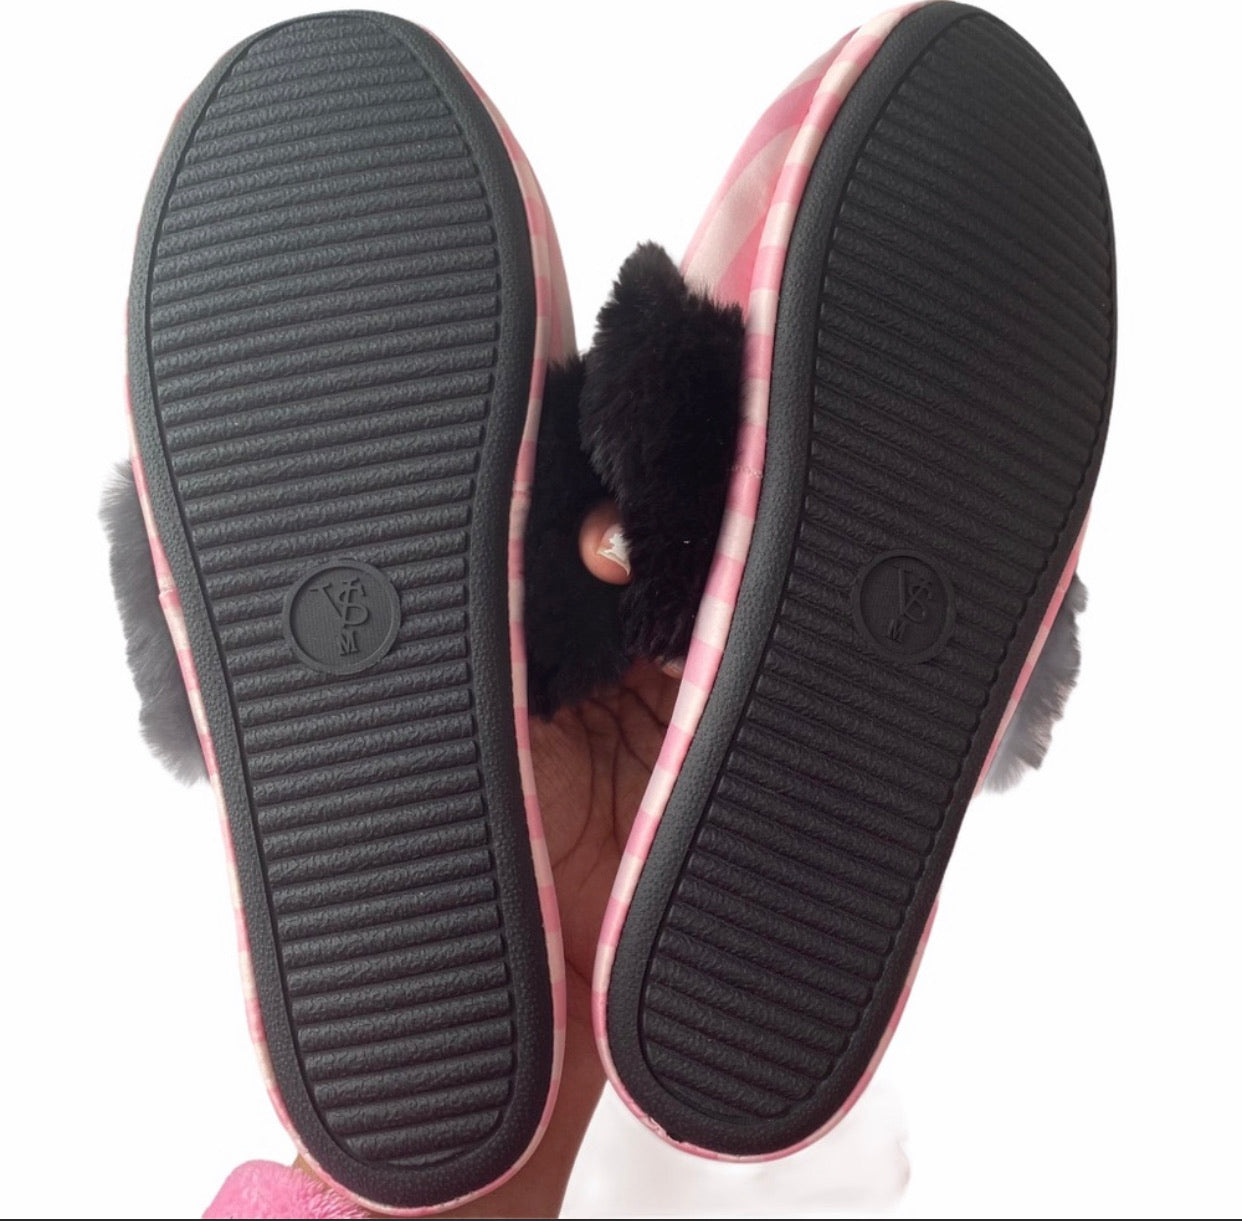 Pink slippers size 7/8 with bag